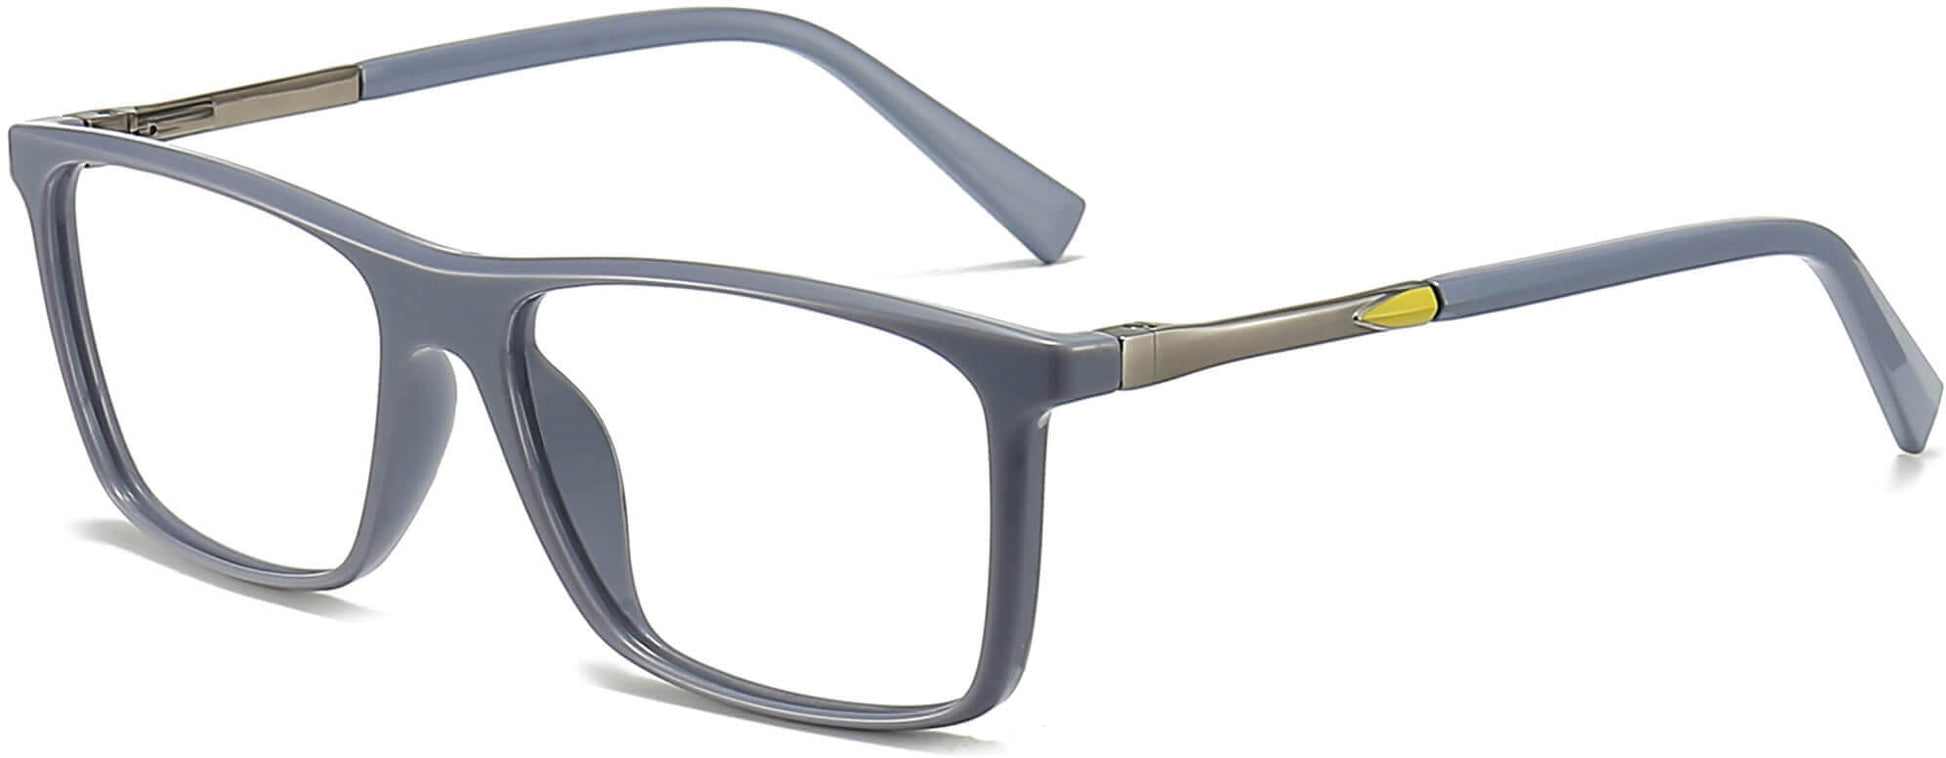 Casey Rectangle Gray Eyeglasses from ANRRI, angle view